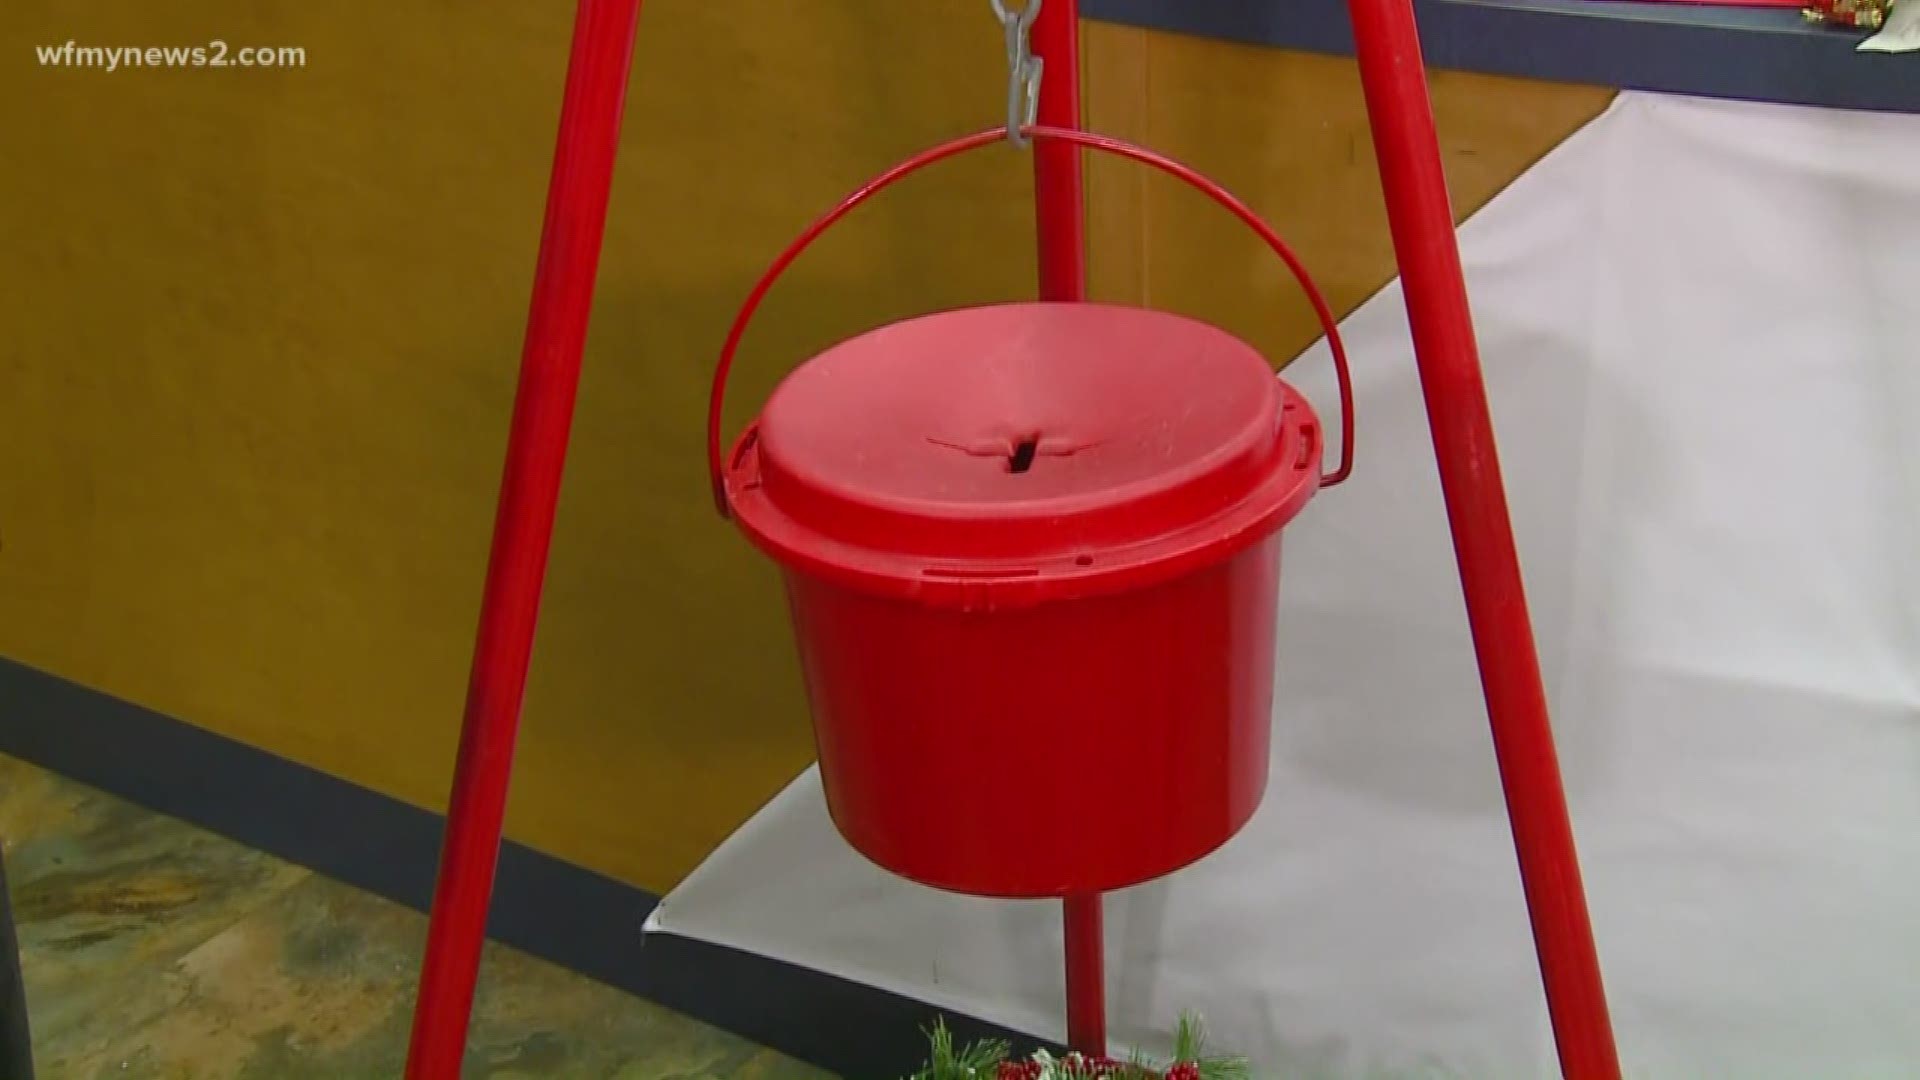 The money raised in the Red Kettles helps with the agency's social service programs.